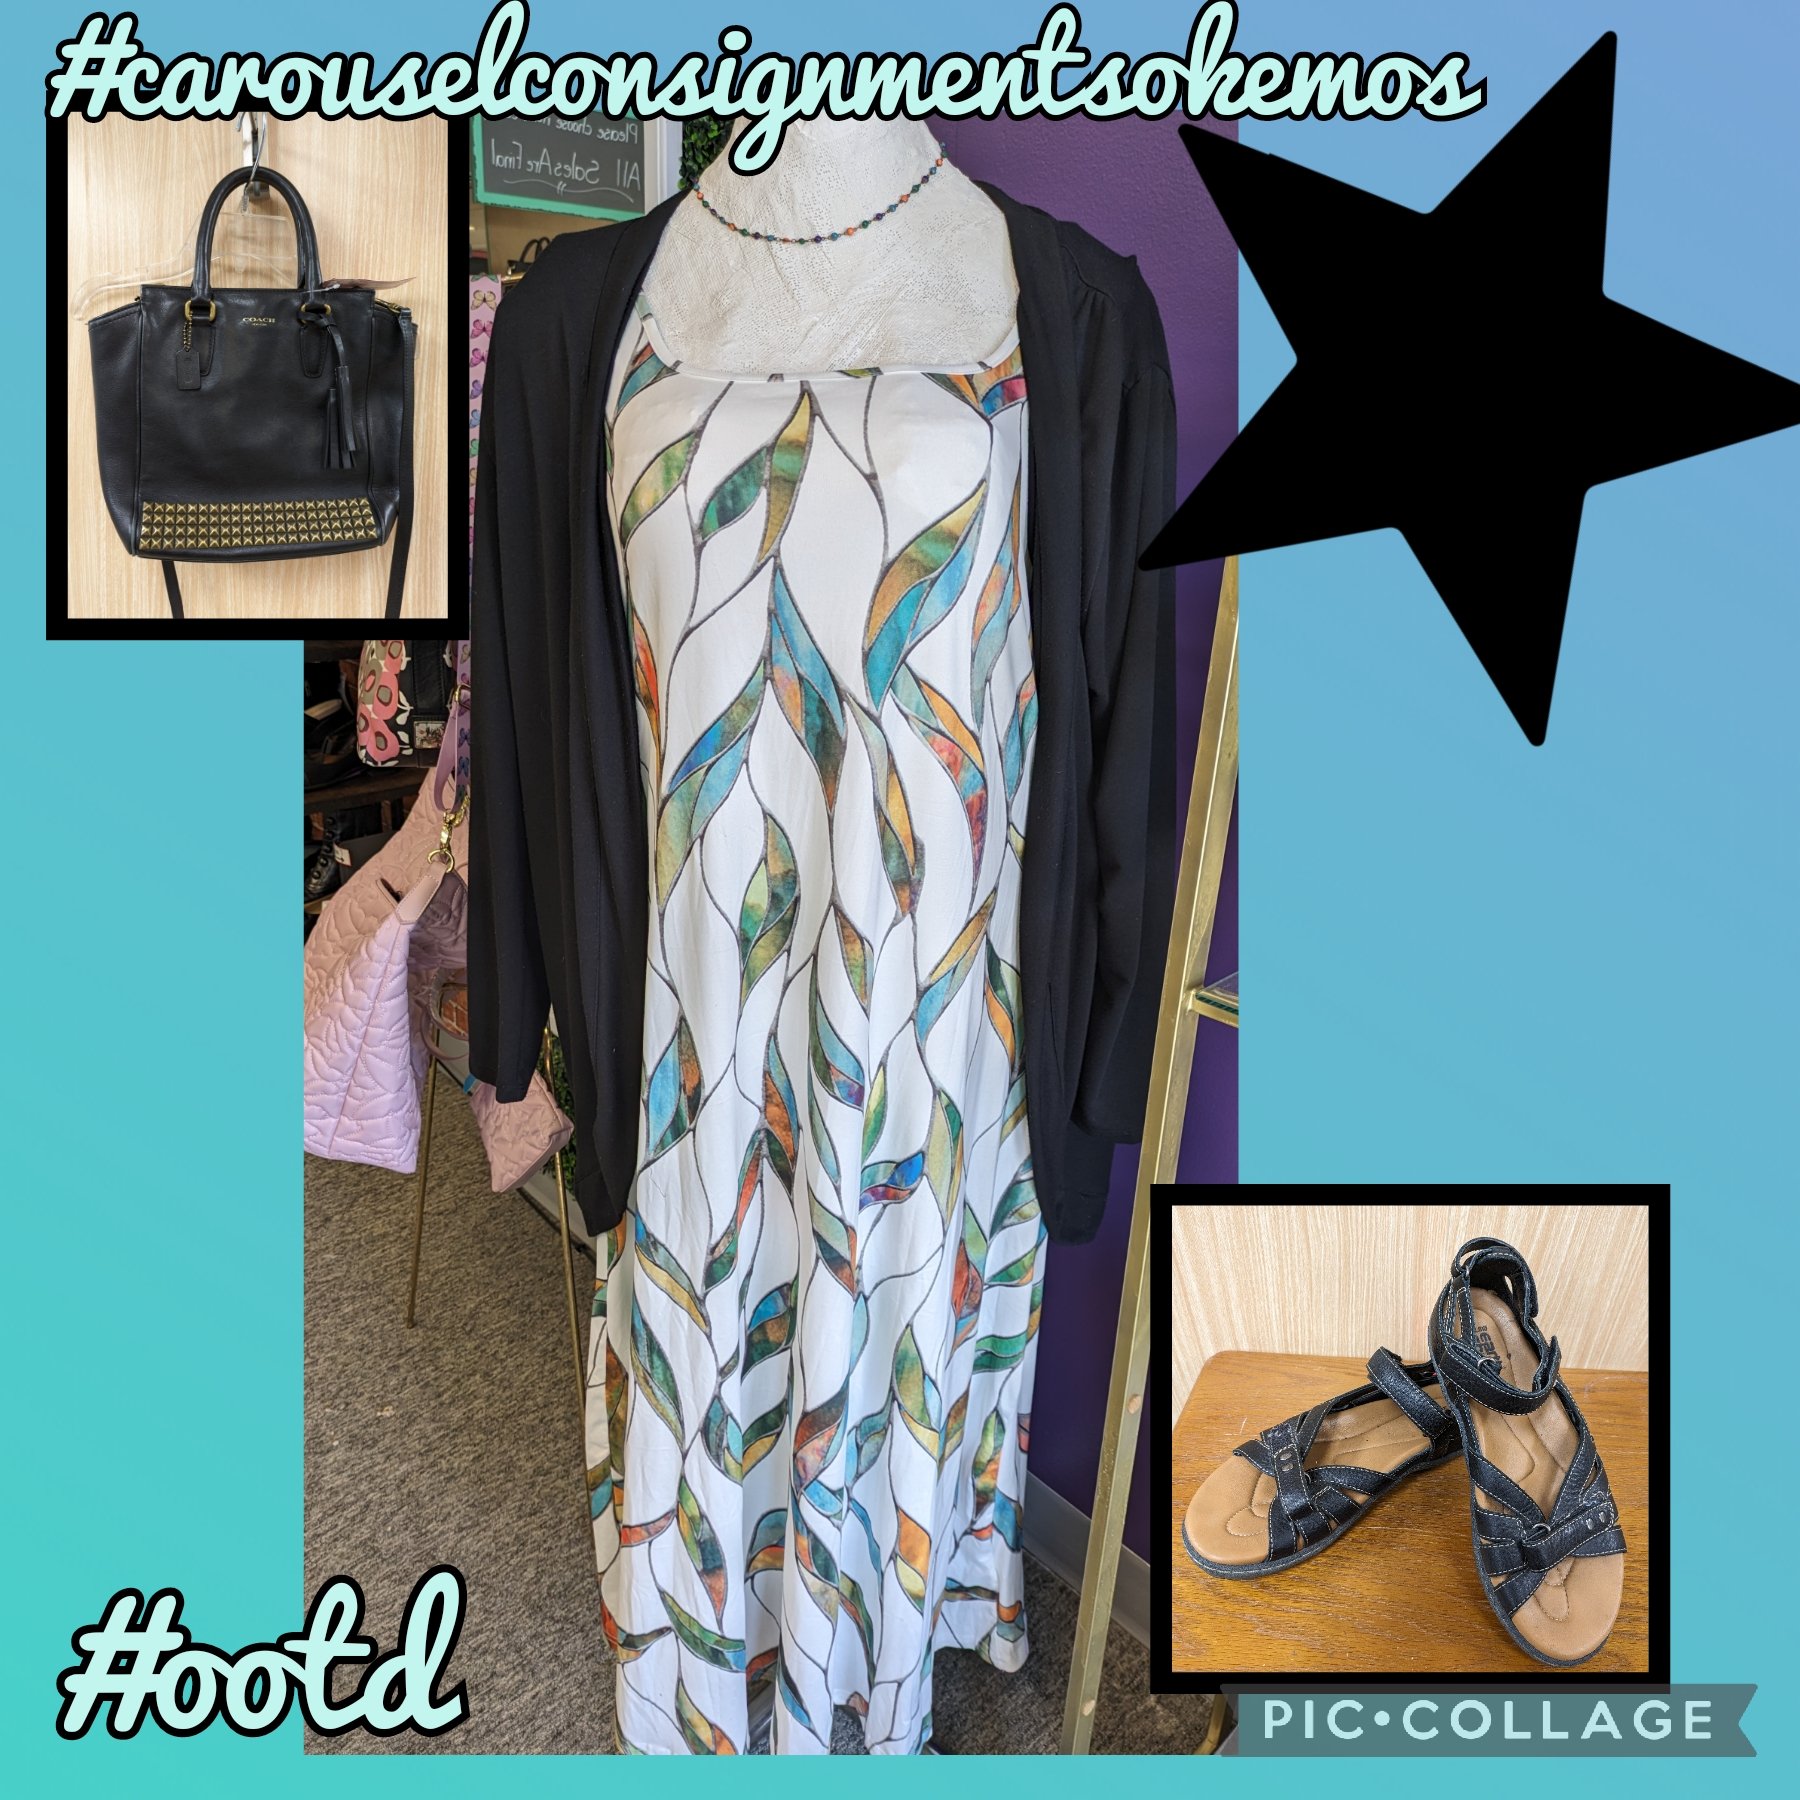 🎋Pretty in Prints🎋
Noracora Maxi Dress Size XXL $14
New York &amp; Co Cardigan Size 2x $15
Necklace $7
Earth Sandals Size 8 $30
Coach Mini Tanner Studded Legacy Crossbody $109
#carouselconsignmentsokemos #shoplocal #shopsmall #shopsmallbusiness #re